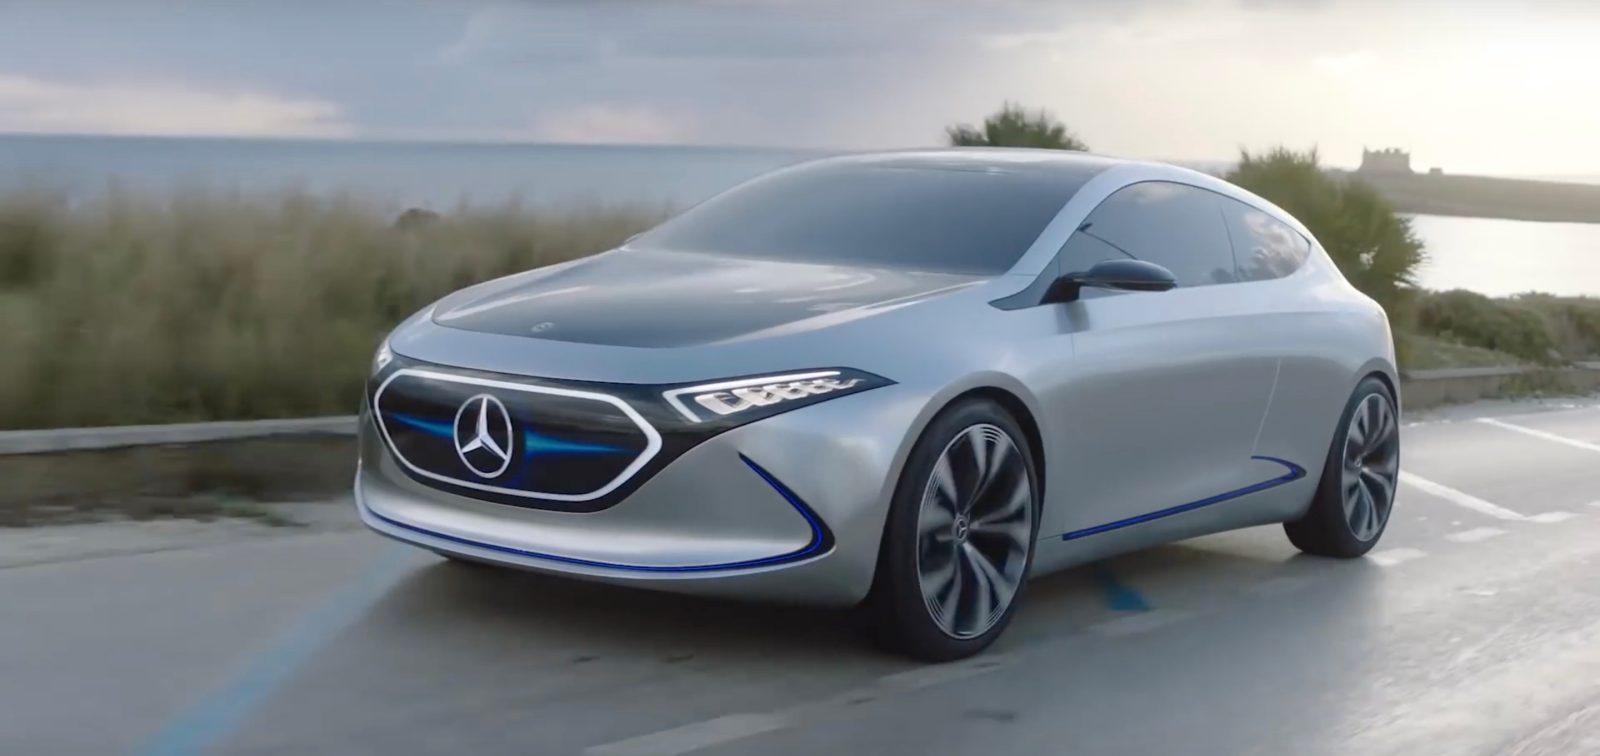 MercedesBenz showcases latest allelectric compact car working